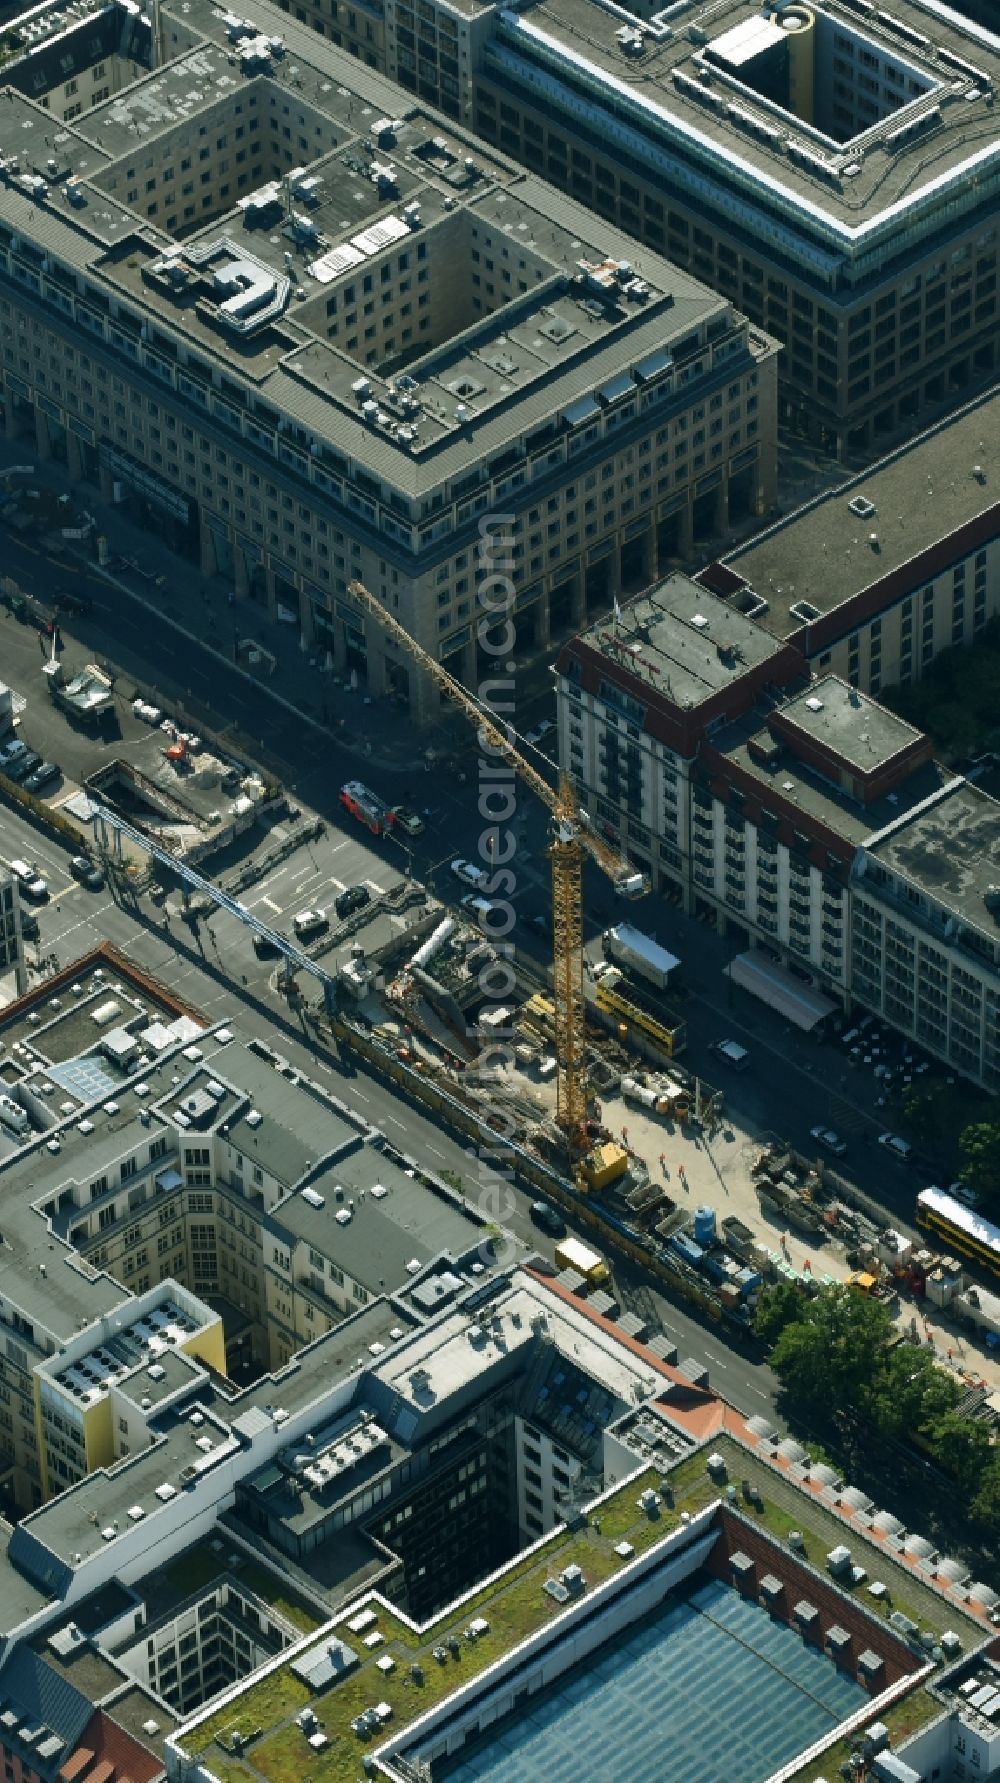 Berlin from above - Construction site for the new subway line in the street Unter den Linden in the district of Mitte in Berlin